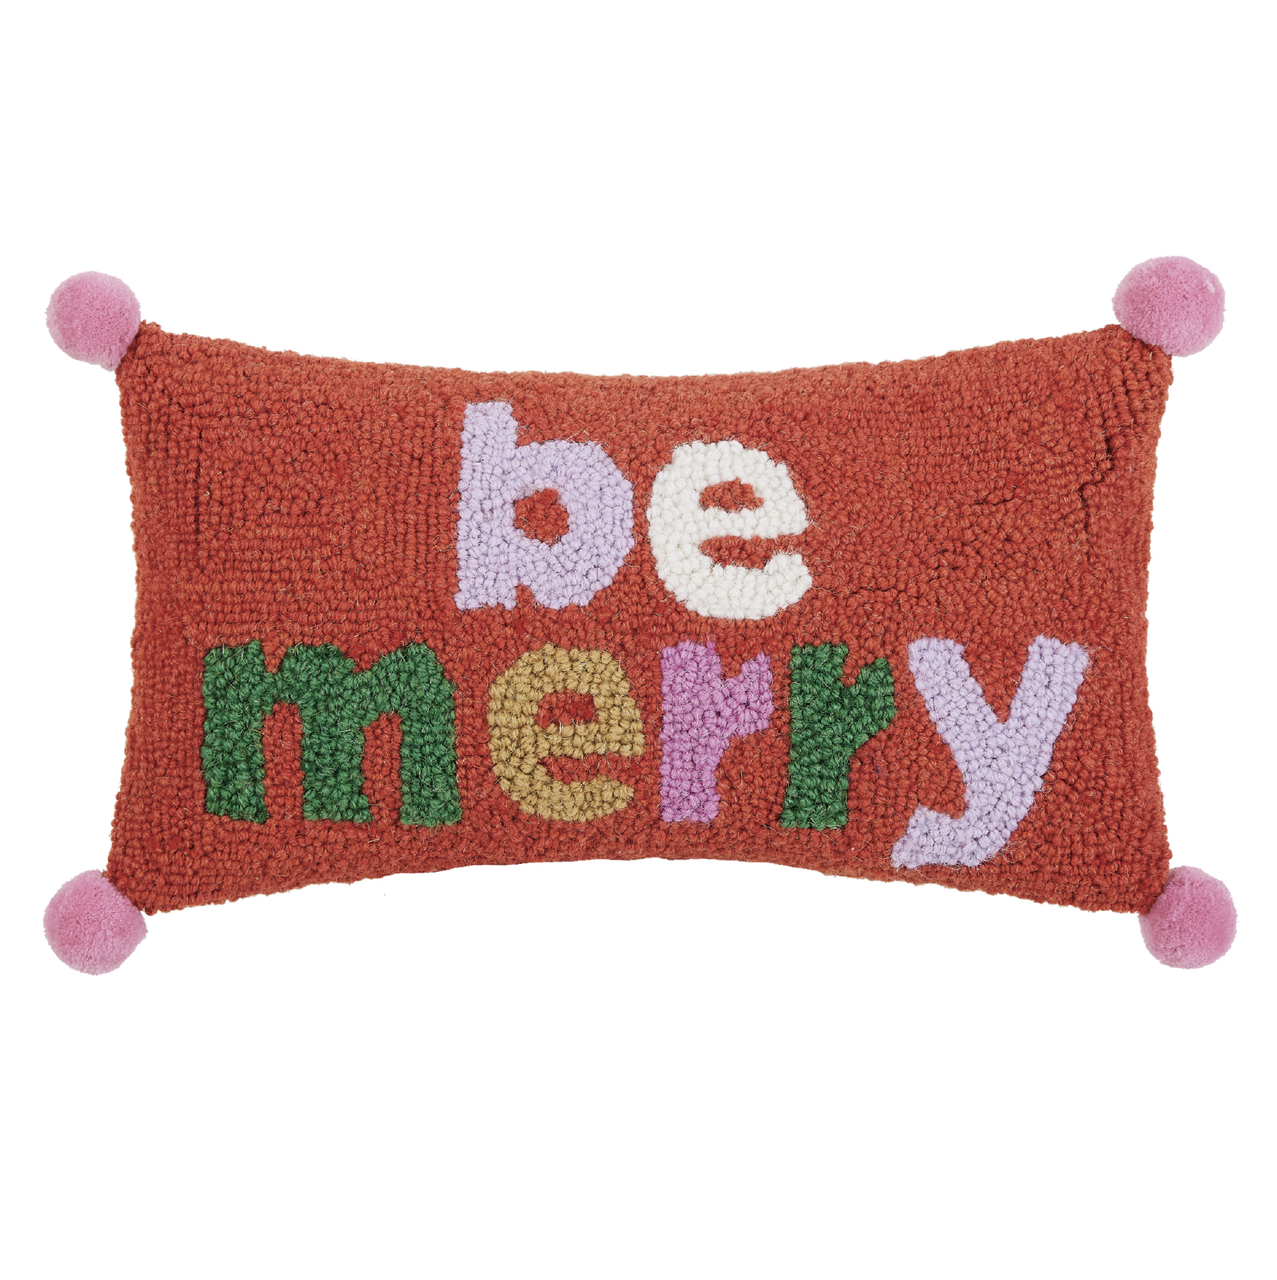 Be Merry with Pom Pom Hook Pillow